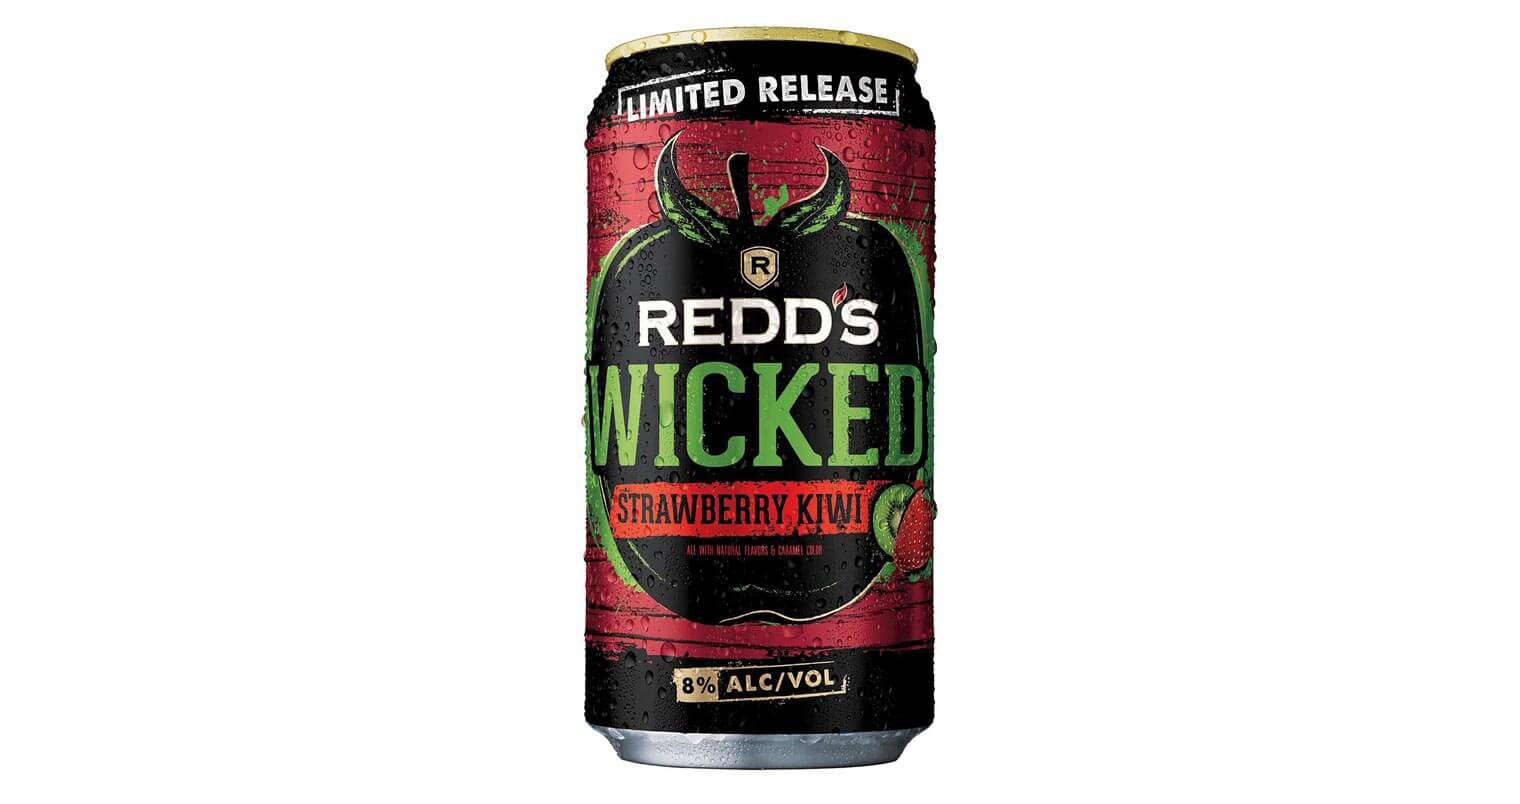 Redd's Wicked Introduces Strawberry Kiwi, featured image